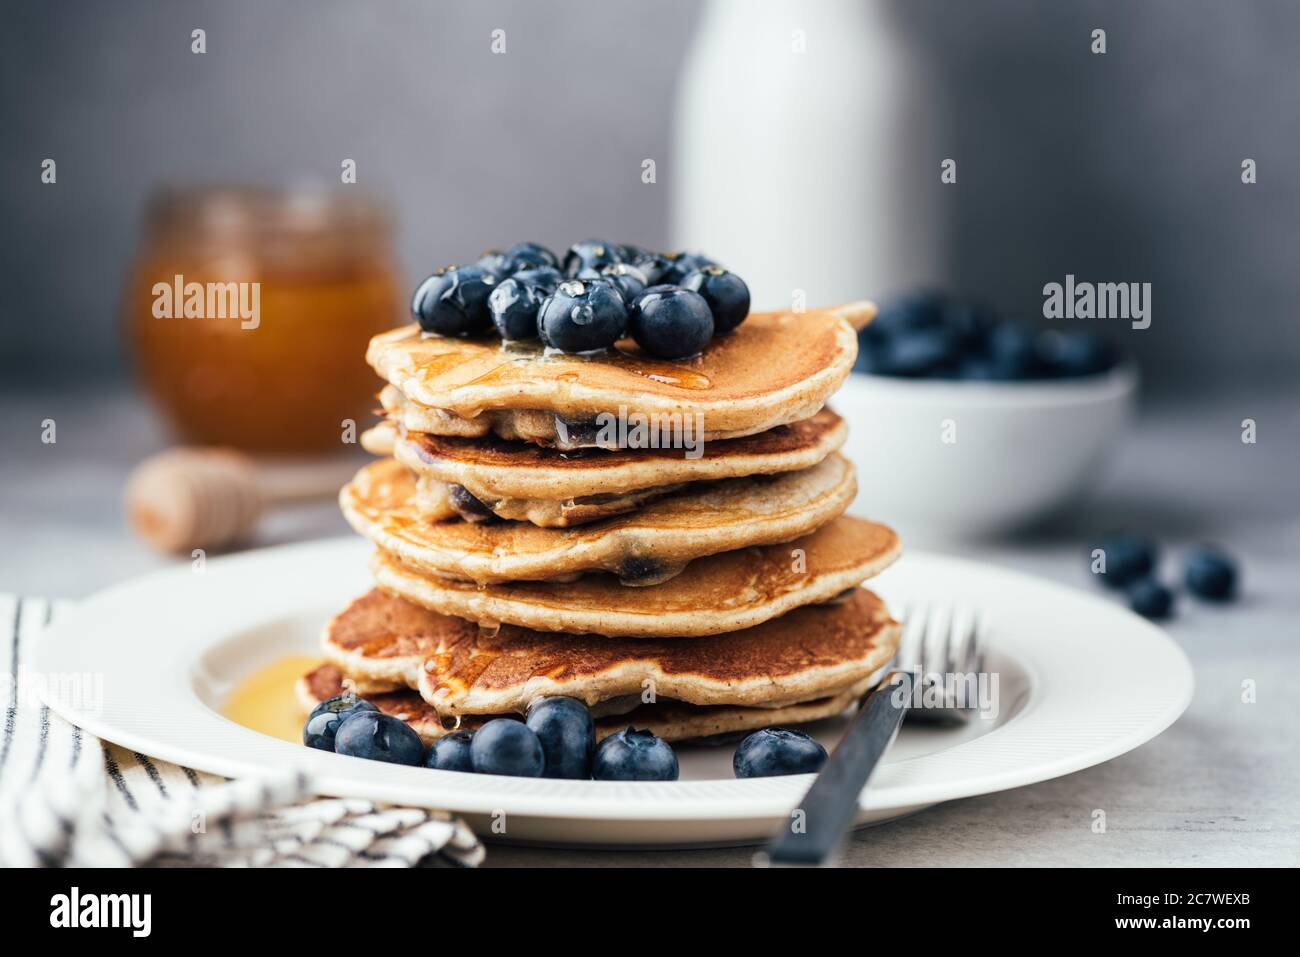 Oat pancakes with blueberries and honey on white plate. Stack of healthy vegetarian pancakes, low carb paleo pancakes Stock Photo